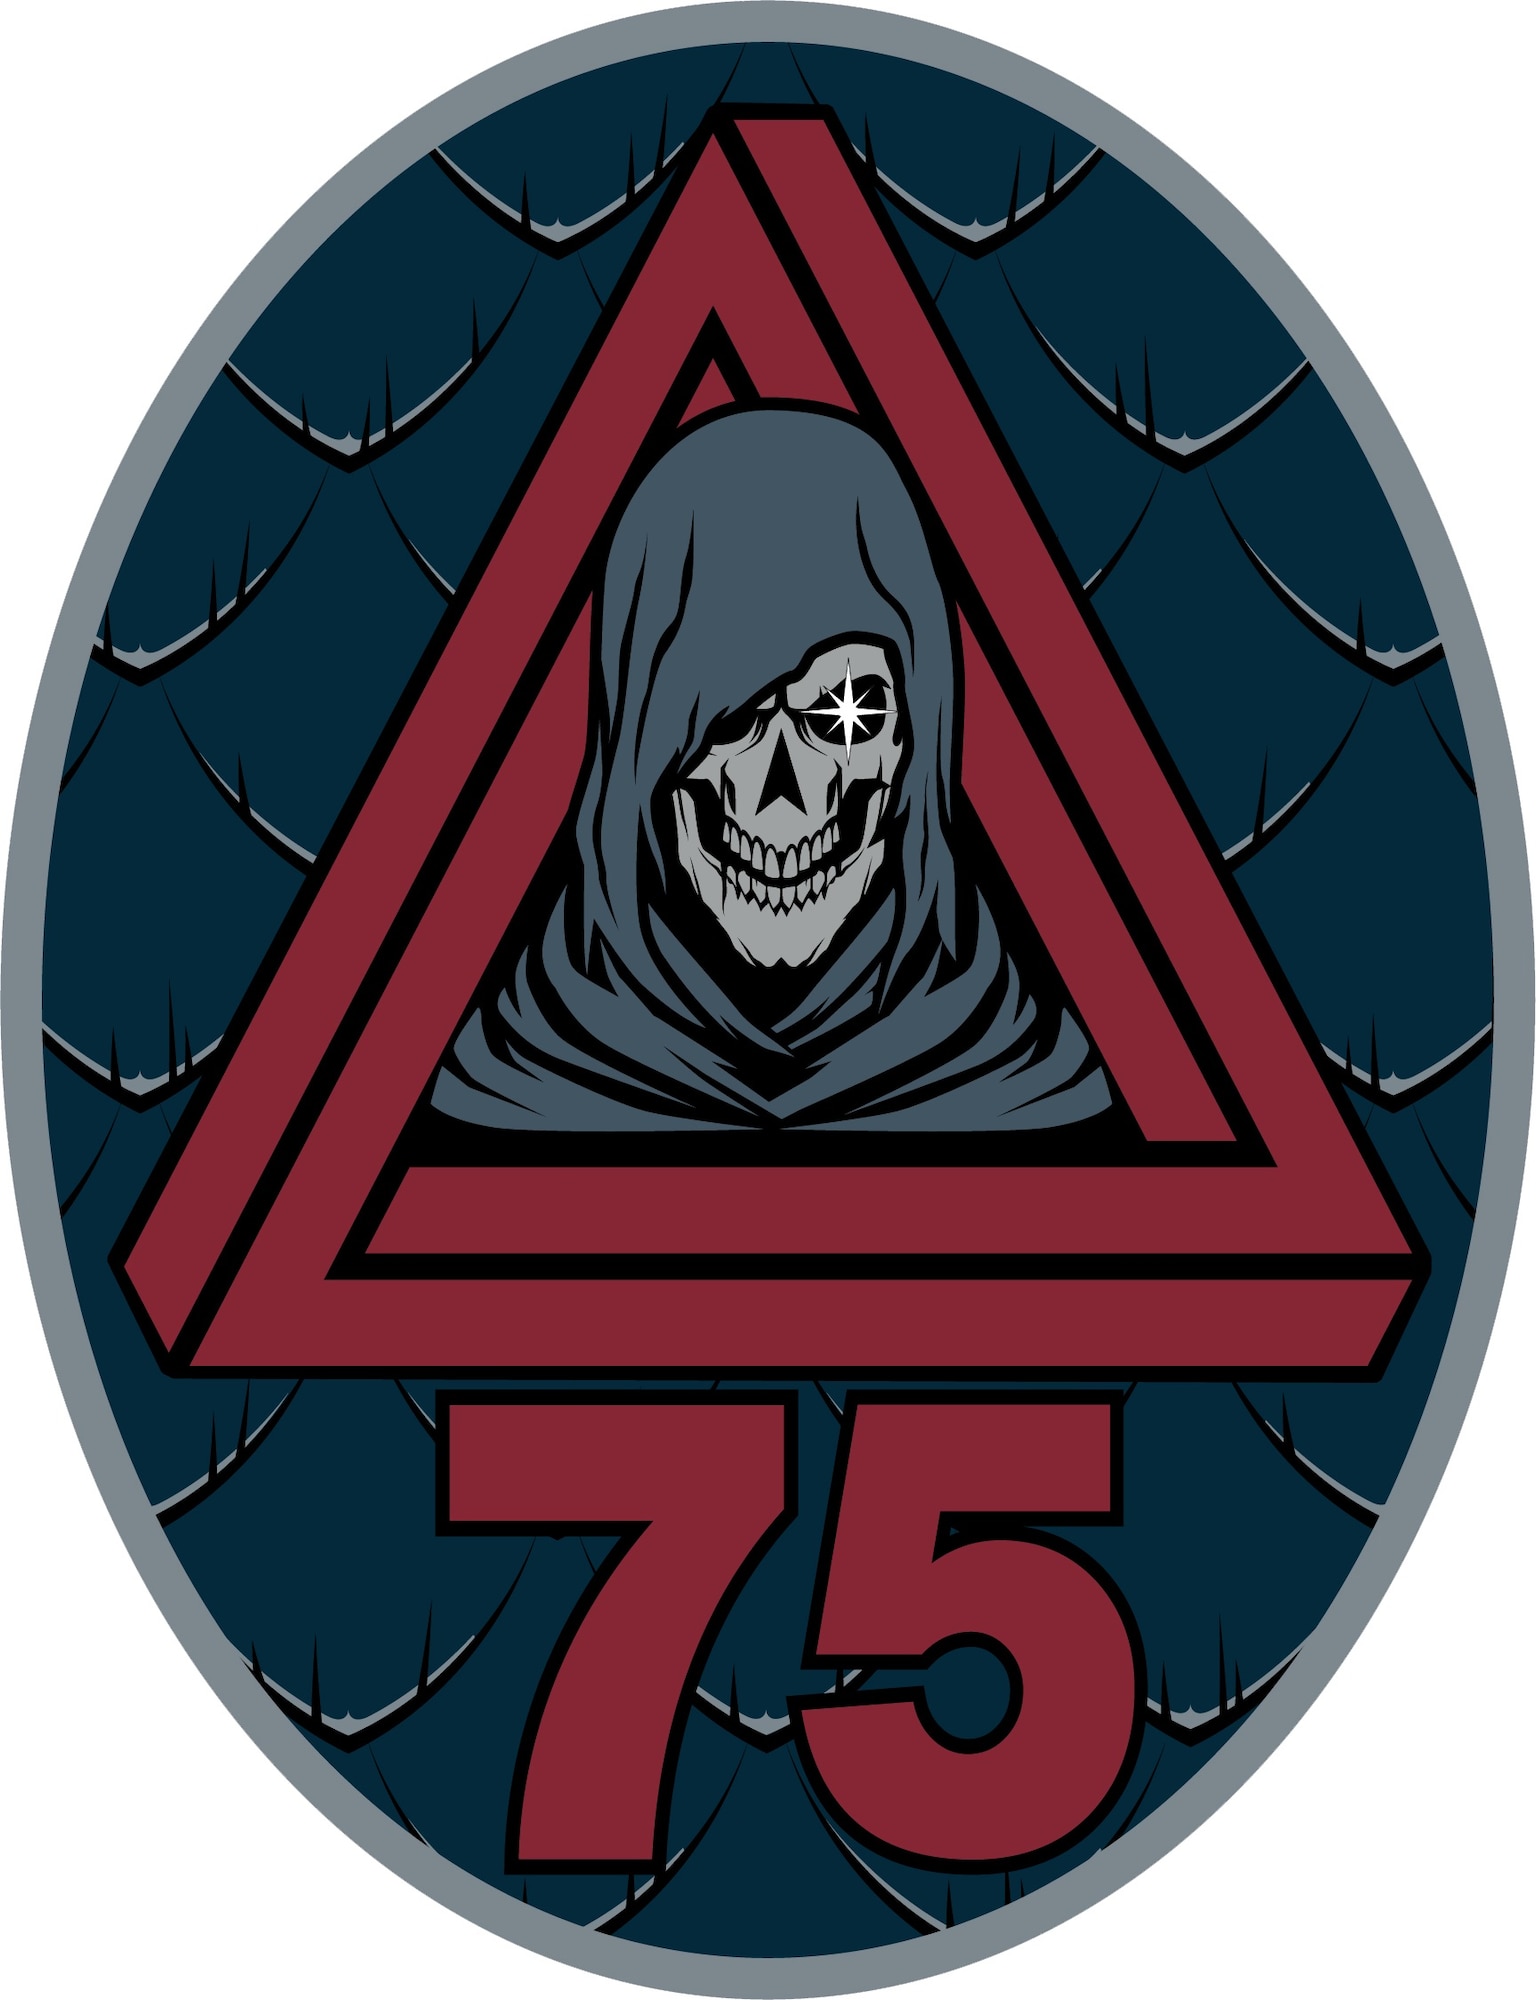 The patch shows a reaper inside of a 3D red triangle, with a large red 75 below it. The background is a vertical orientated dark blue oval textured with scales.